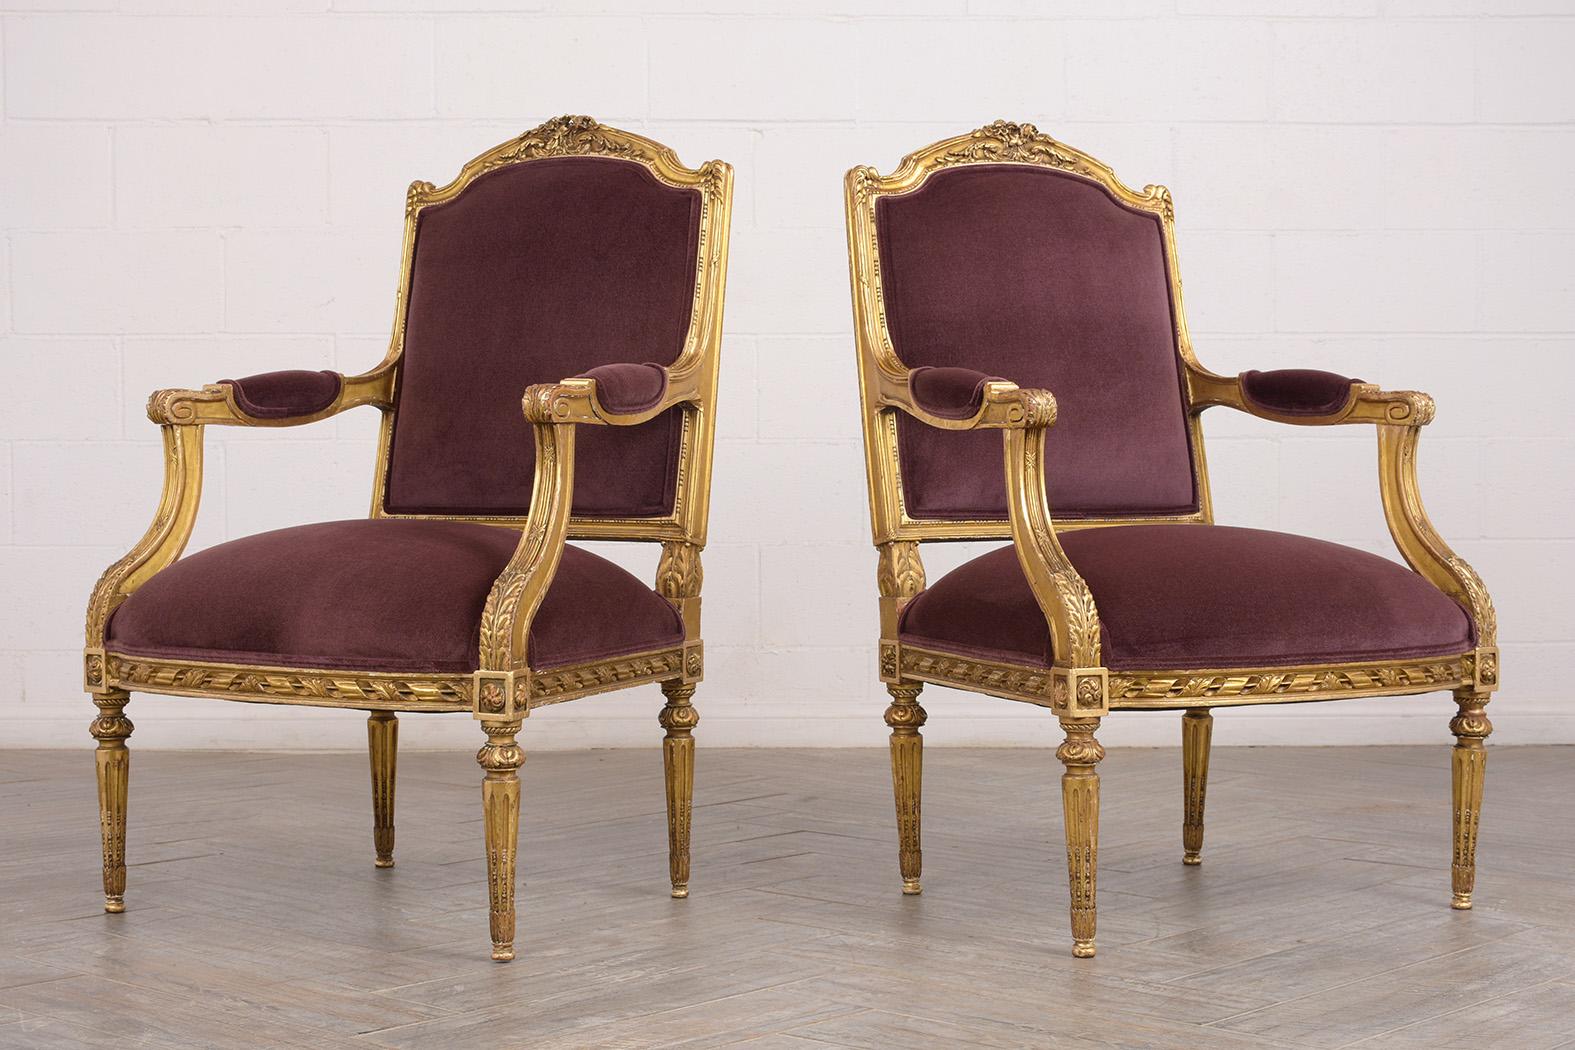 This pair of 1880s French Louis XVI-style armchairs have been completely restored. The giltwood frames feature the original finish and are adorned with intricately carved details of flowers, leaves, scrolls, and traditional motif decorative bands.